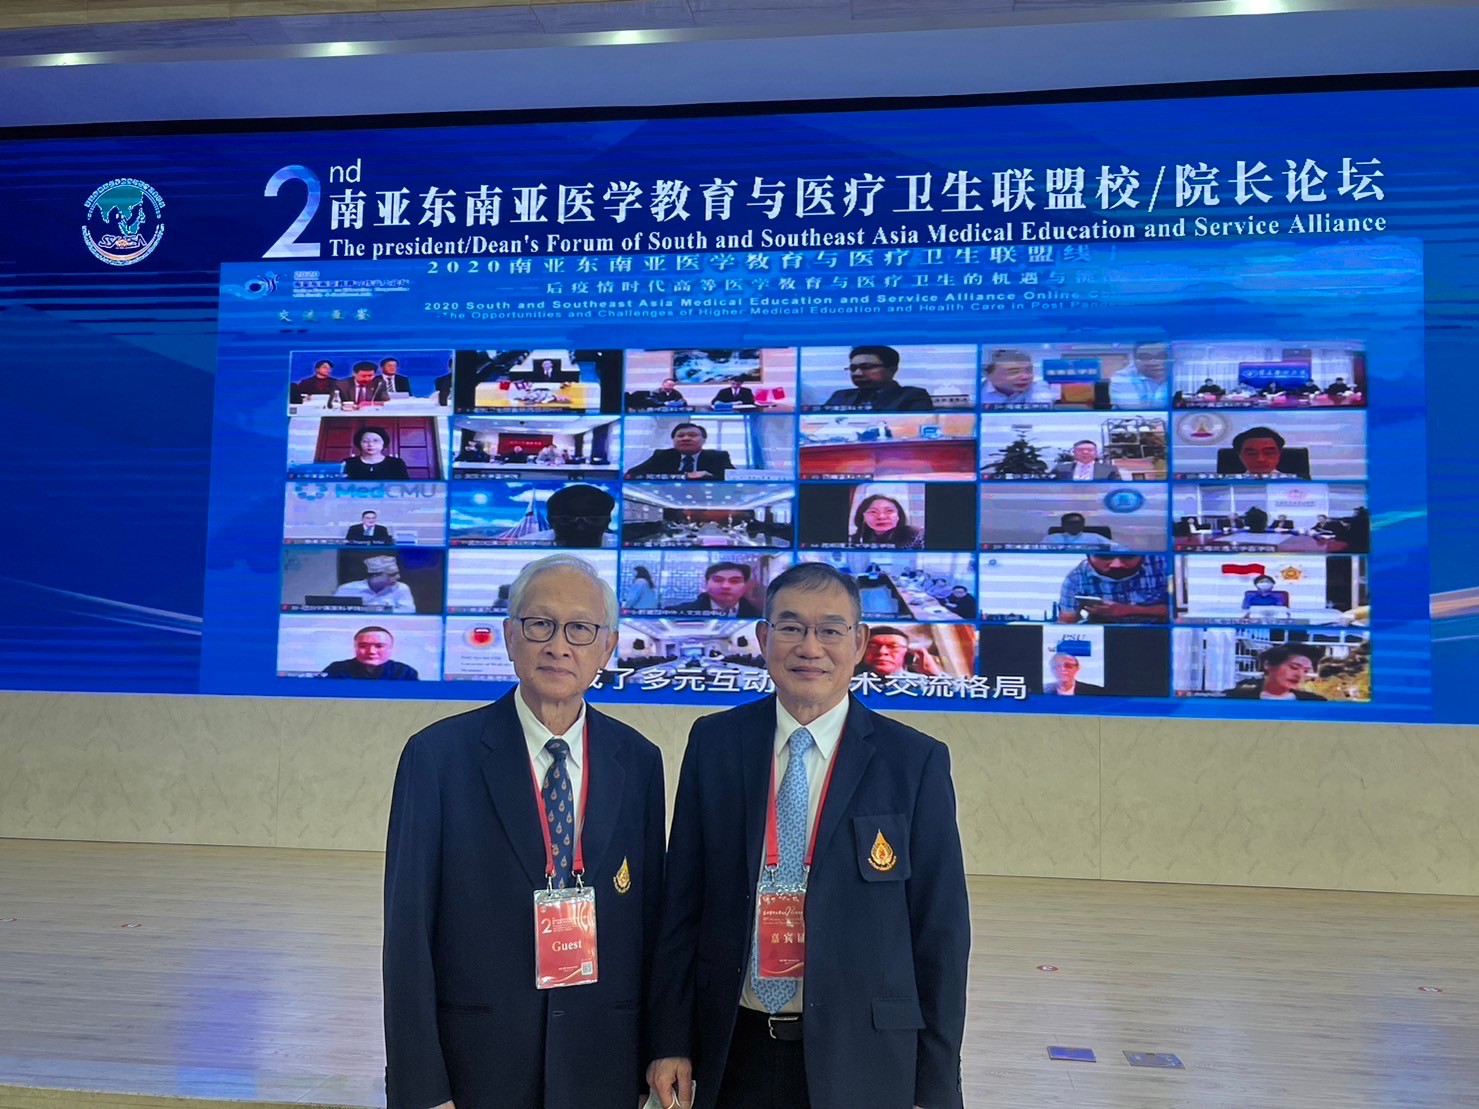 MFU Executives Attend the 2nd President/Dean’s Forum of SSAMESA and the 90th Anniversary Celebration Ceremony of Kunming Medical University